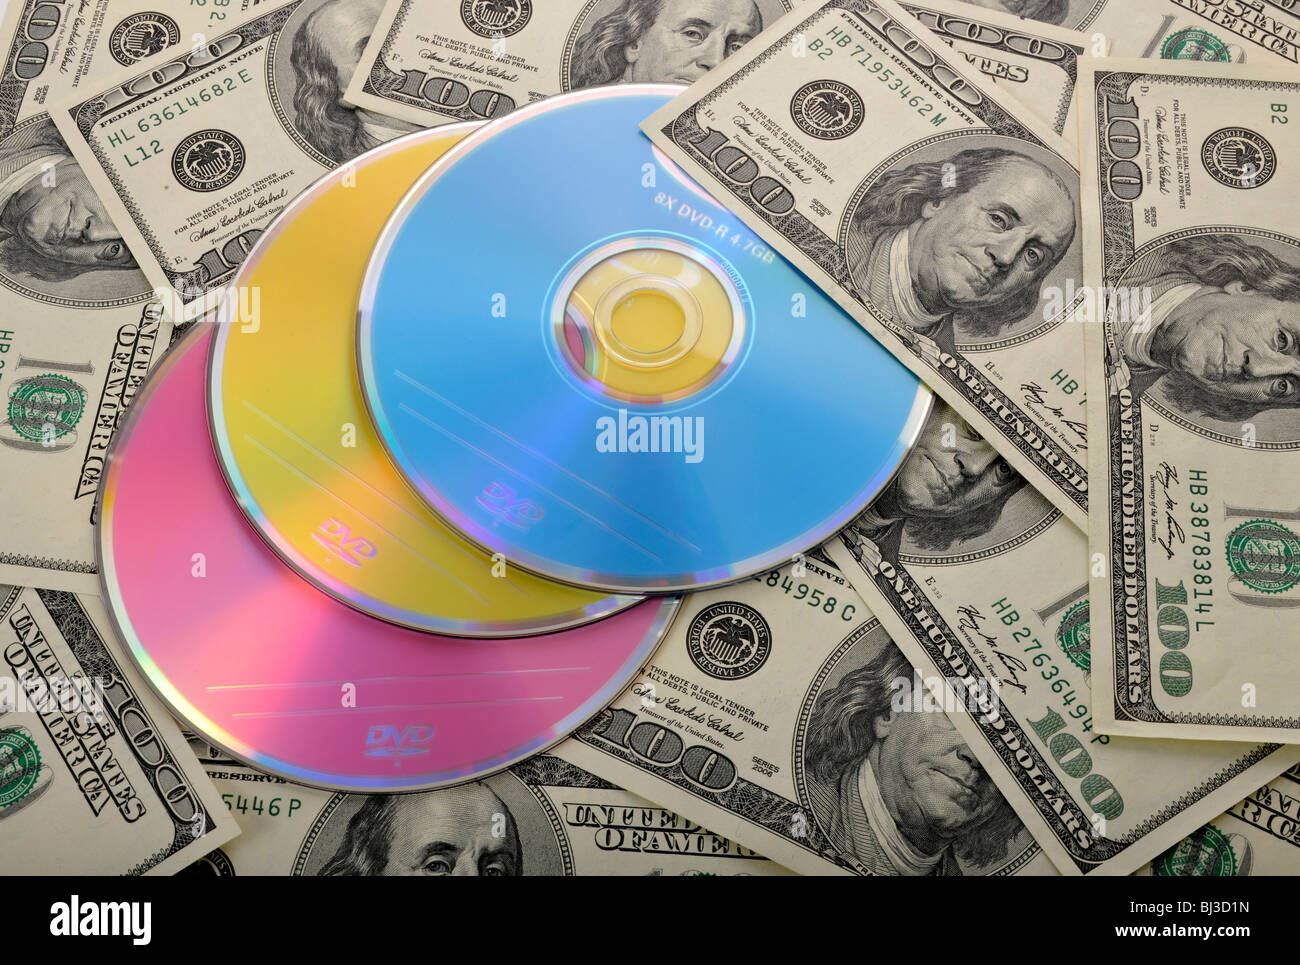 DVDs, CDs, 100-dollar bills, symbolic image for the purchase of bank records, tax evasion, privacy Stock Photo